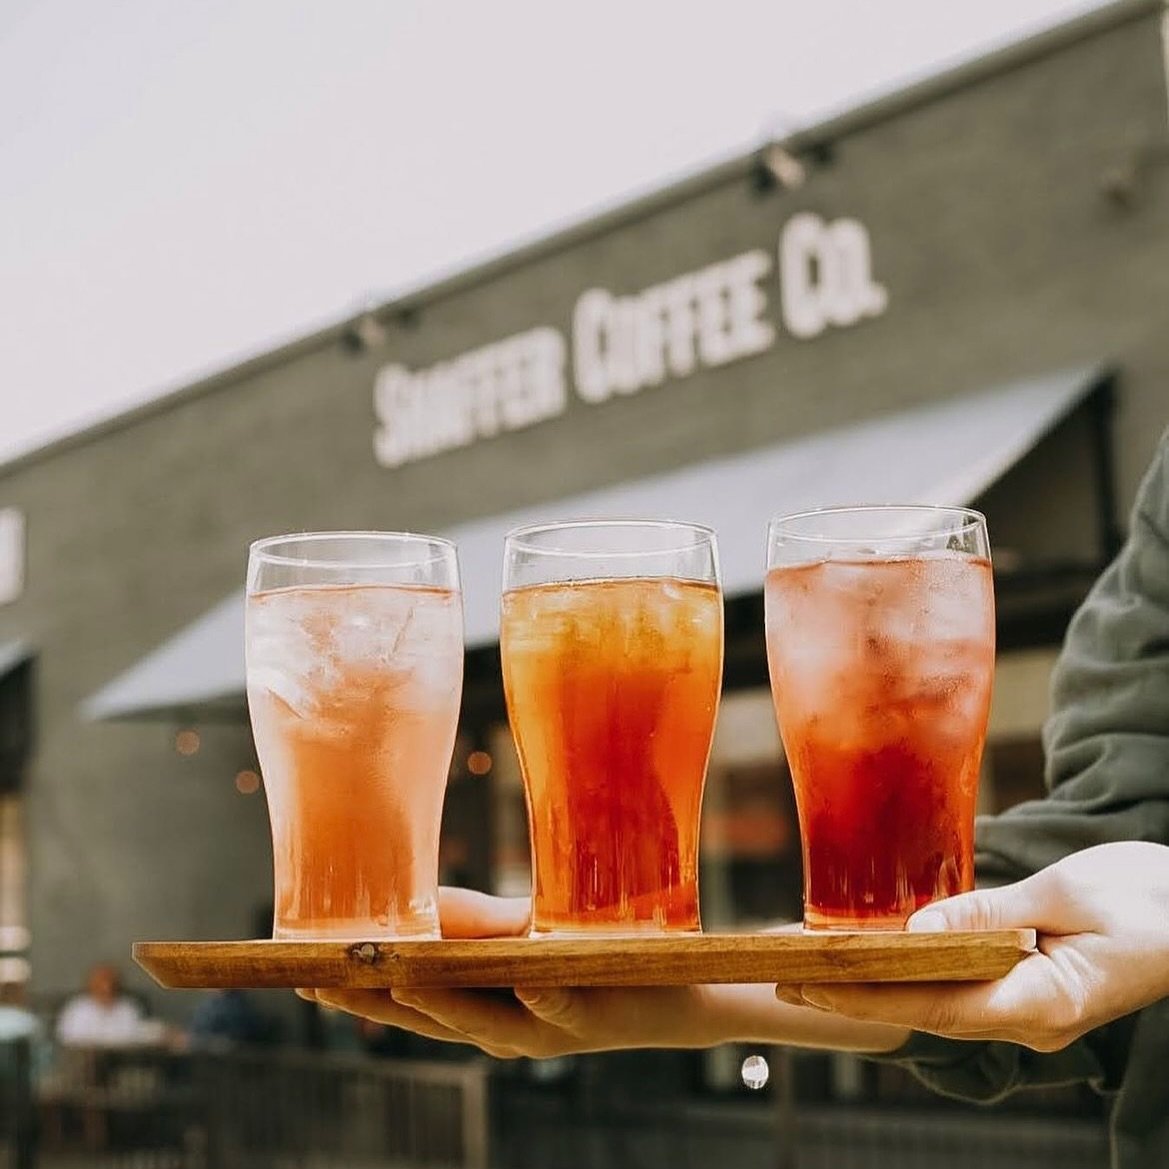 These refreshing teas at @shaffercoffee seem like the perfect way to put a little pep in our step this week! 

📸: @shaffercoffee 

#MurrayKY #MurrayKentucky #FinalsWeek #MurrayState